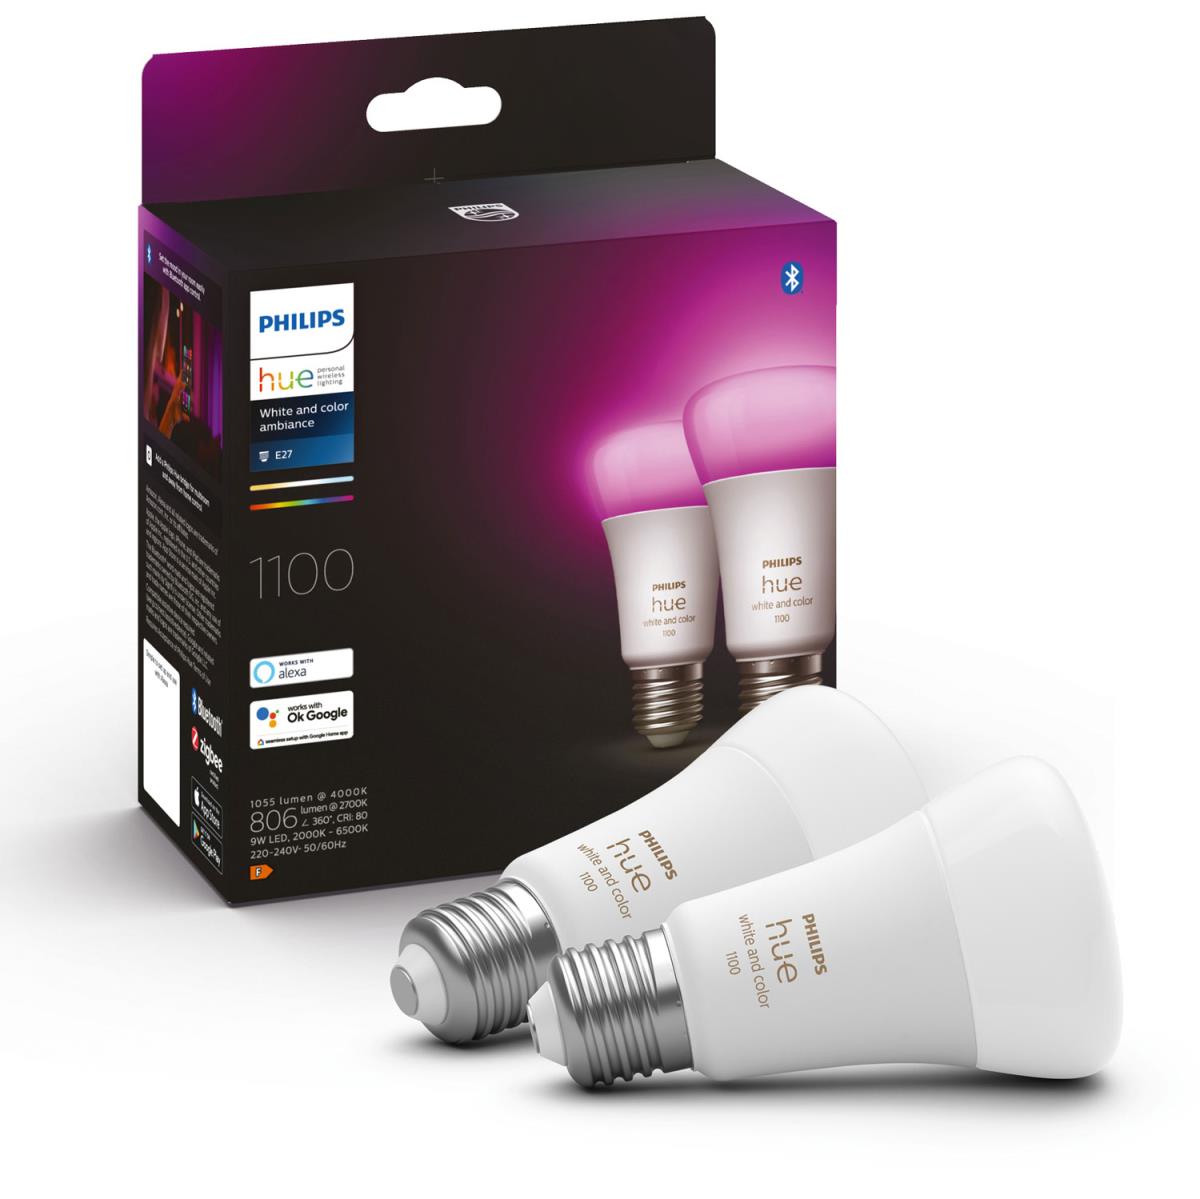 Philips: Hue White Color Ambiance E27 1100lm 2-pack